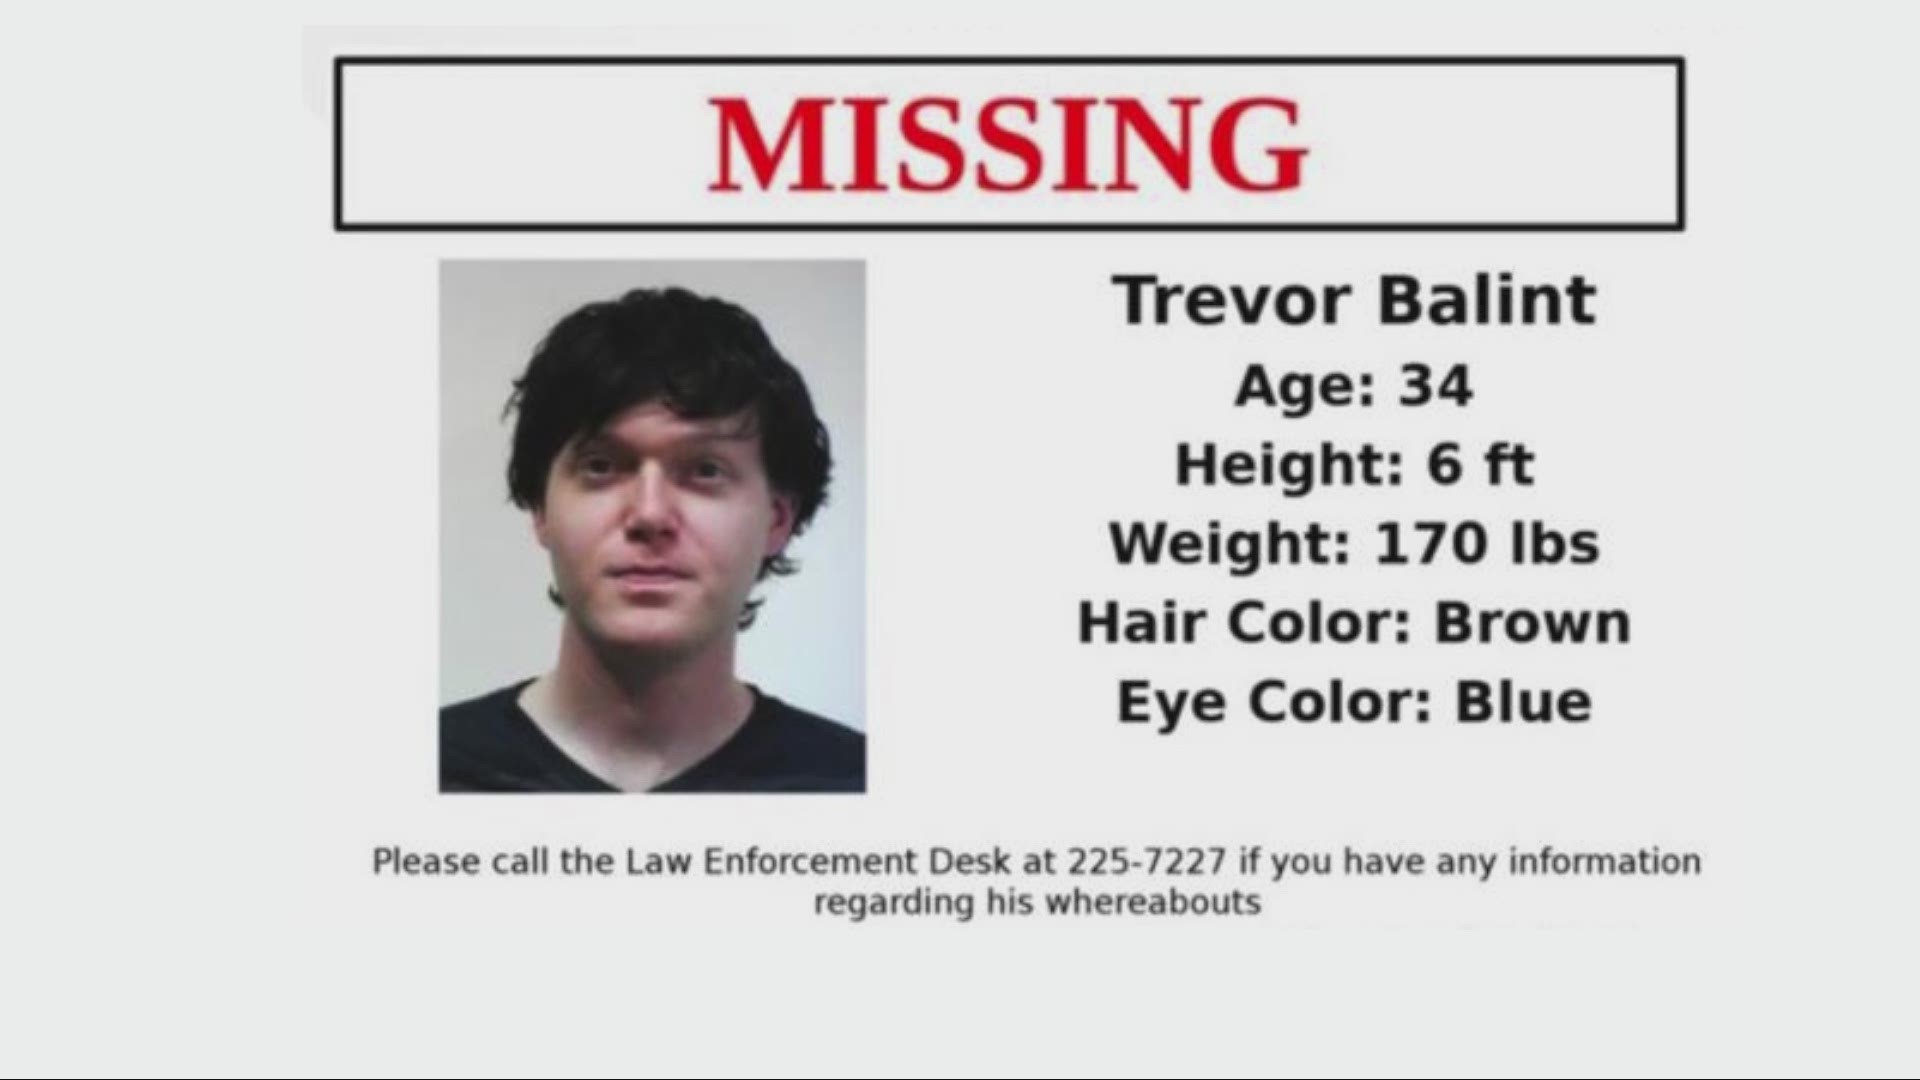 Trevor Balint was last seen almost two weeks ago. His cause of death has not yet been determined.